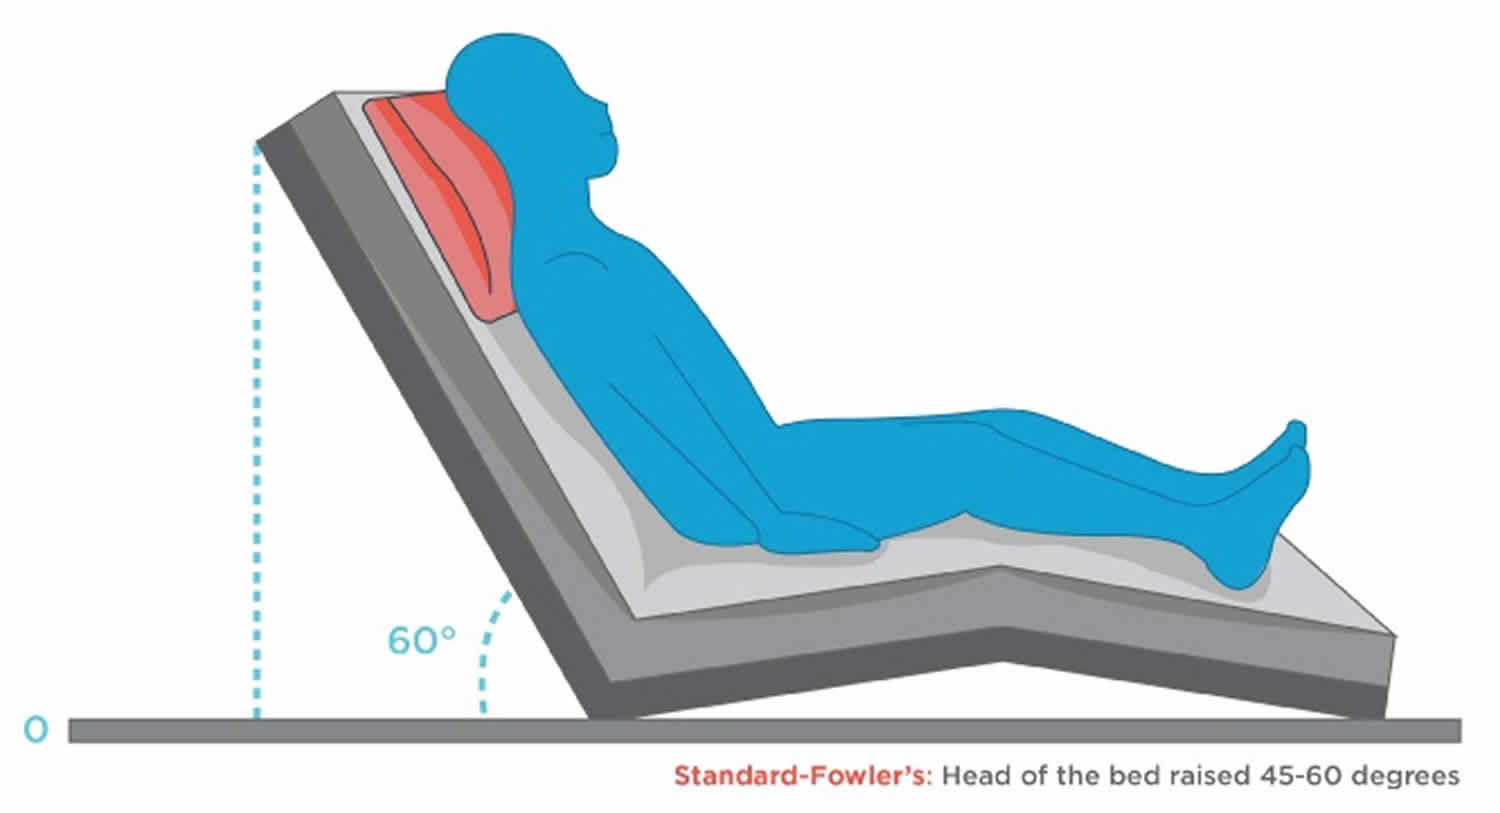 Fowler’s position